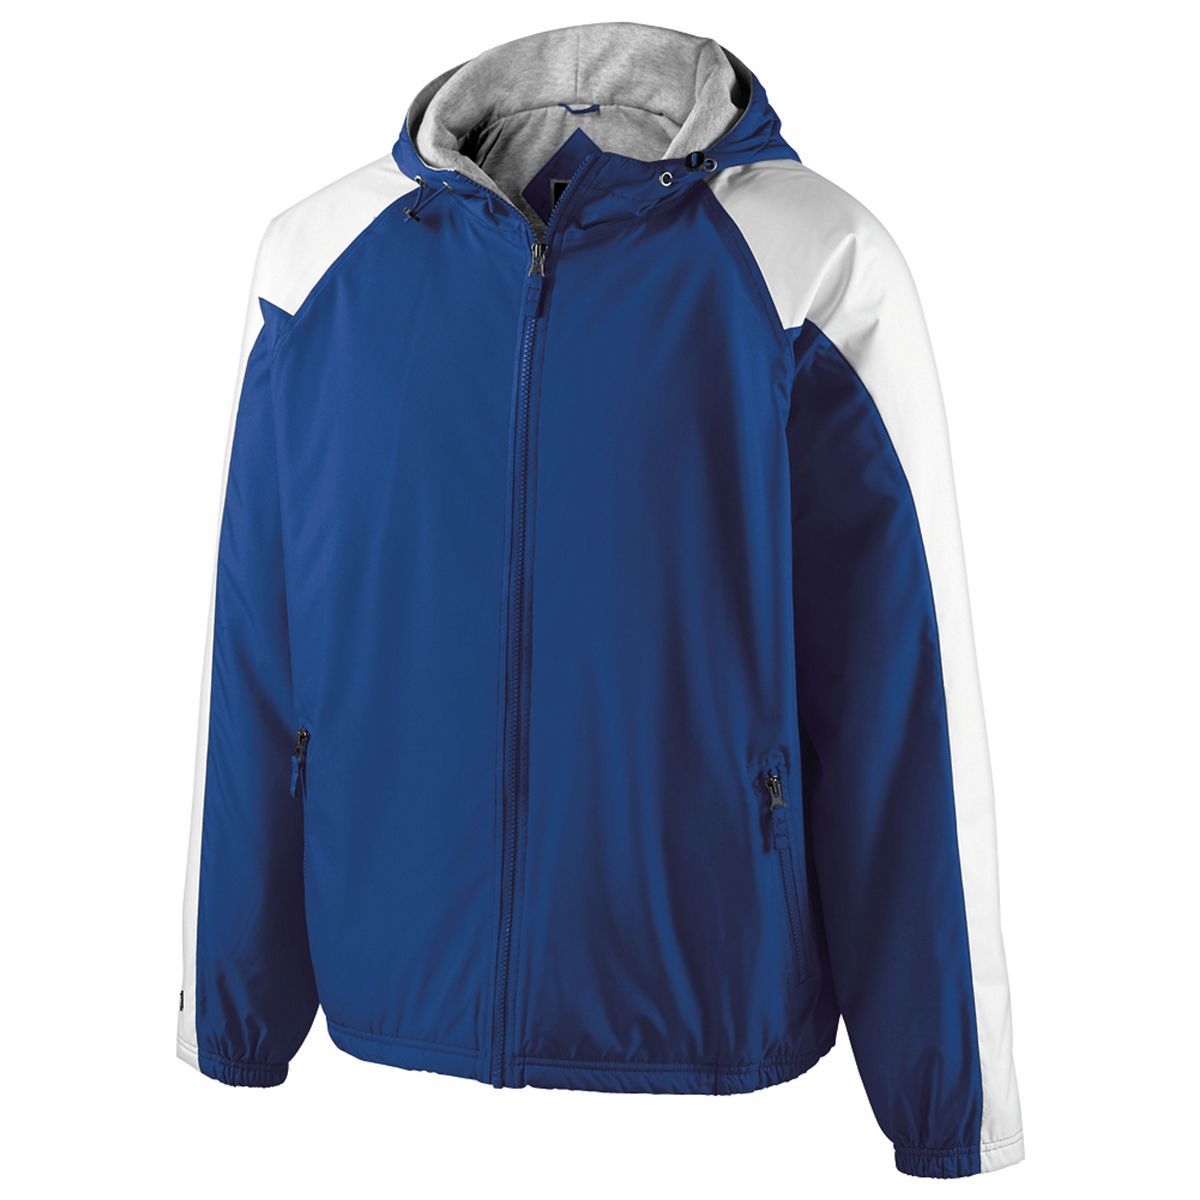 Holloway Homefield Jacket in Royal/White  -Part of the Adult, Adult-Jacket, Holloway, Outerwear product lines at KanaleyCreations.com